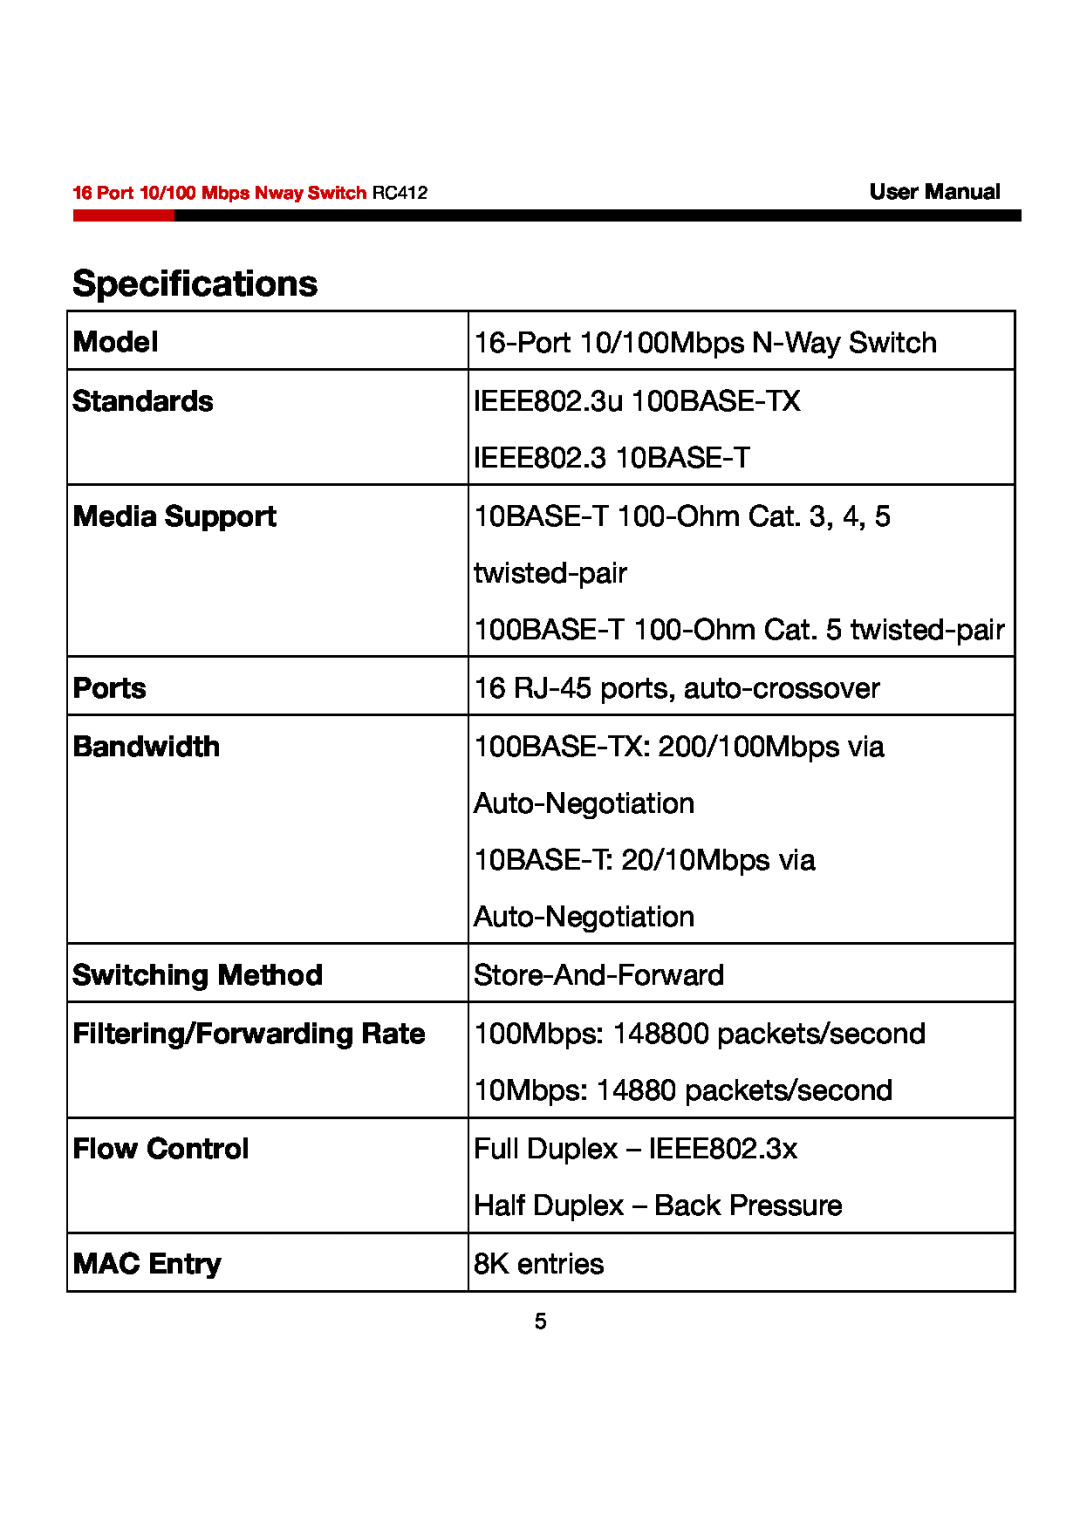 Rosewill RC412 Specifications, Model, Standards, Media Support, Ports, Bandwidth, Switching Method, Flow Control 